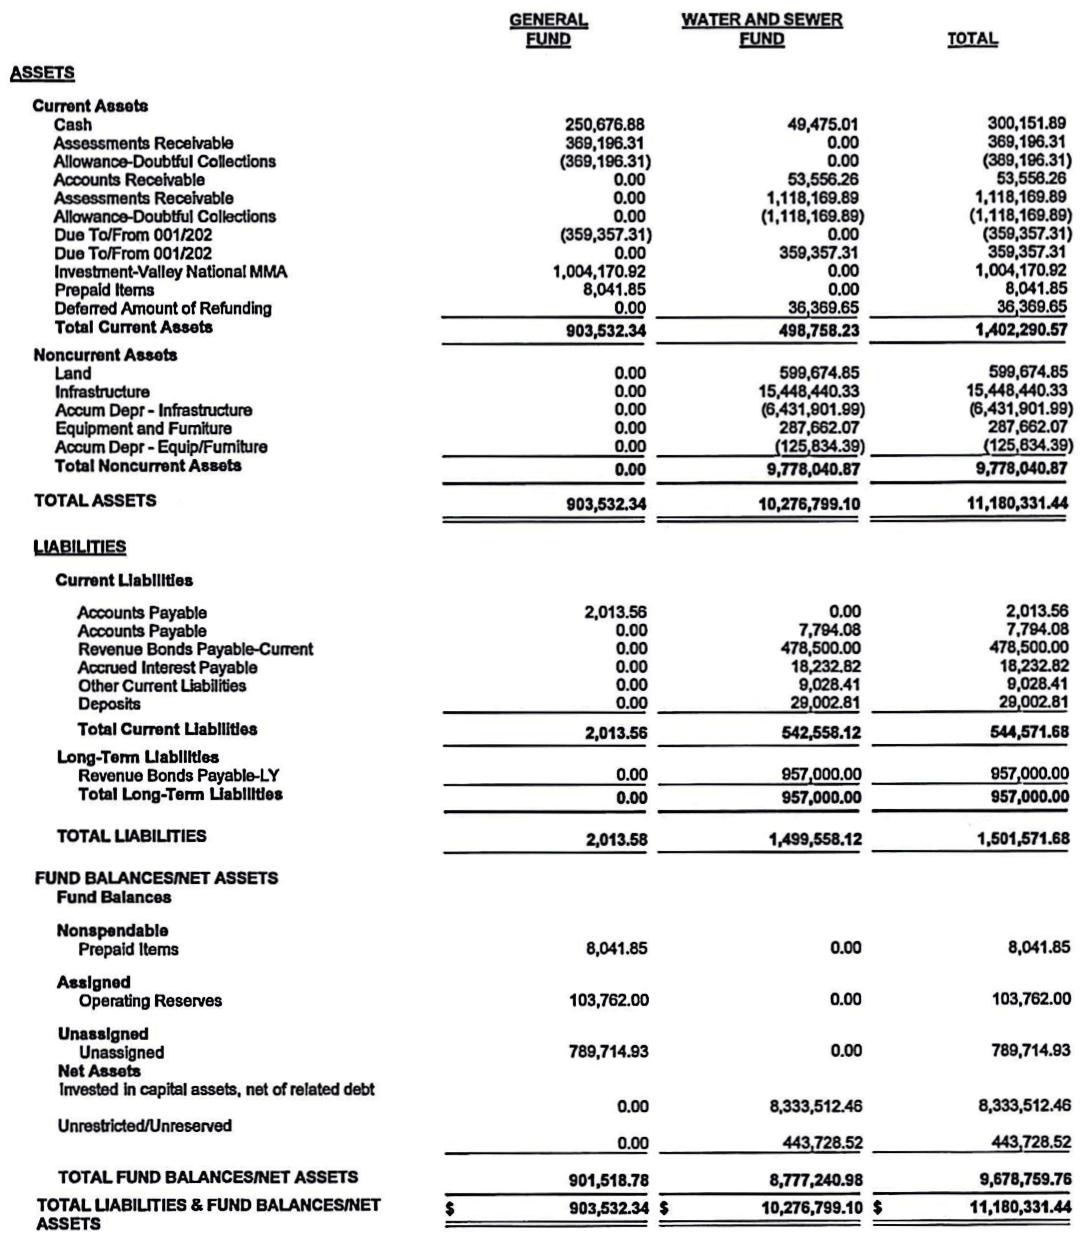 Balance Sheet by Fund data. See below for table